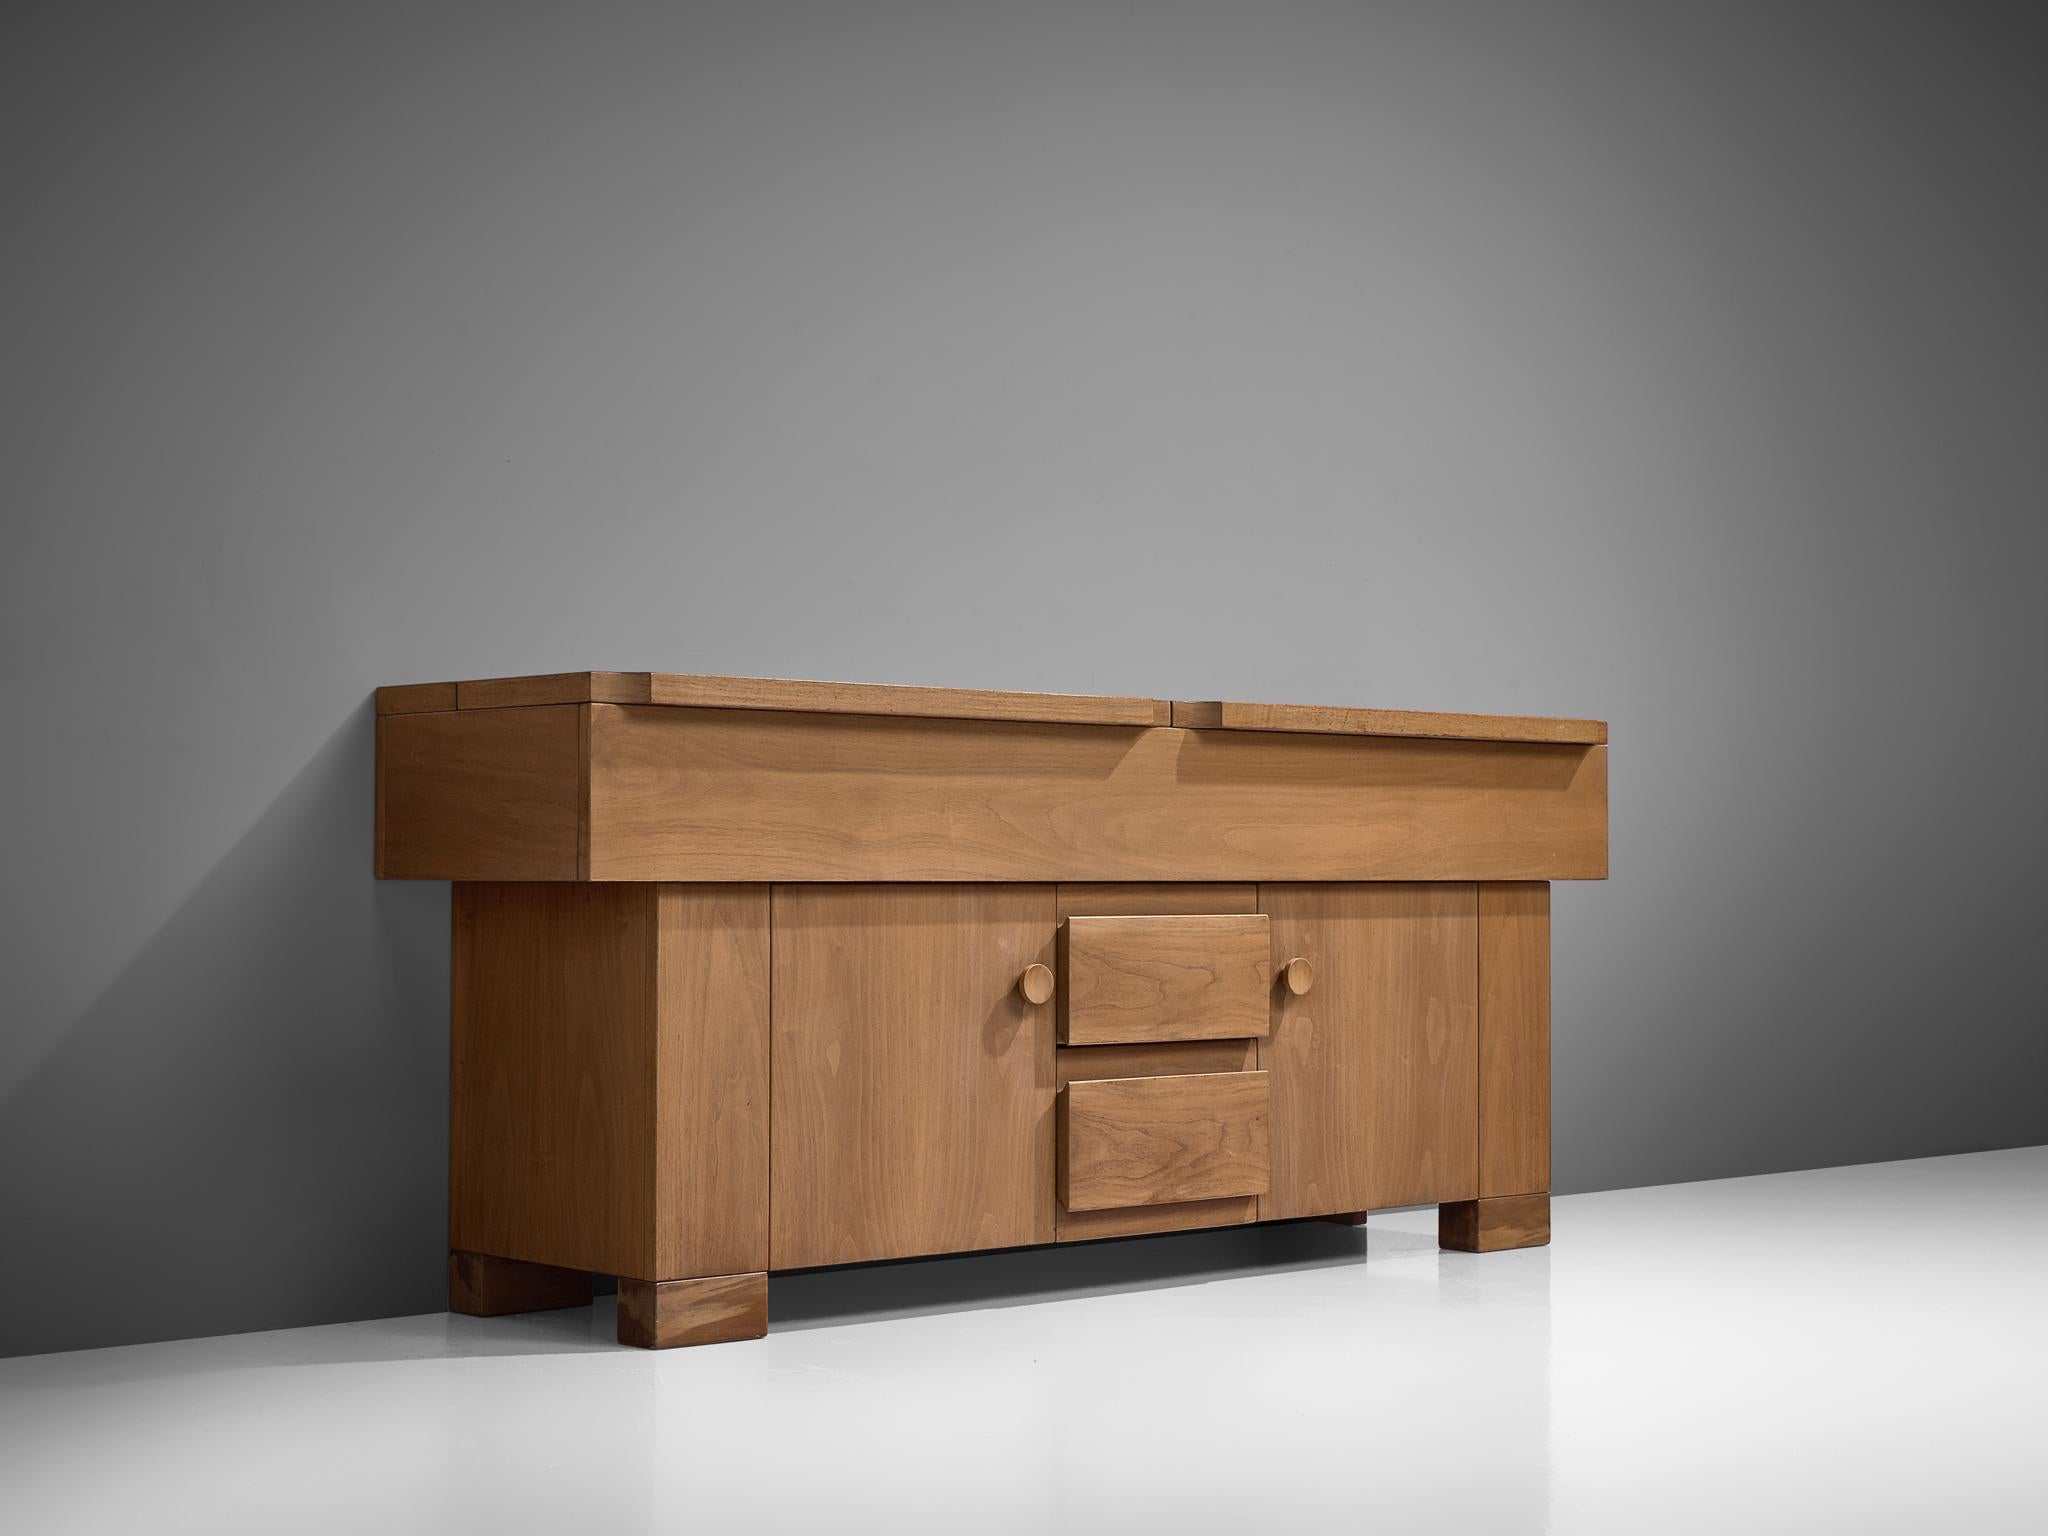 Giovanni Micheluuci, sideboard, walnut, Italy, 1964,

This cabinet will brighten up your interior, though its solid and grand appearance! Stunning cabinet which is very well executed in beautiful walnut. The cabinet features horizontal and vertical